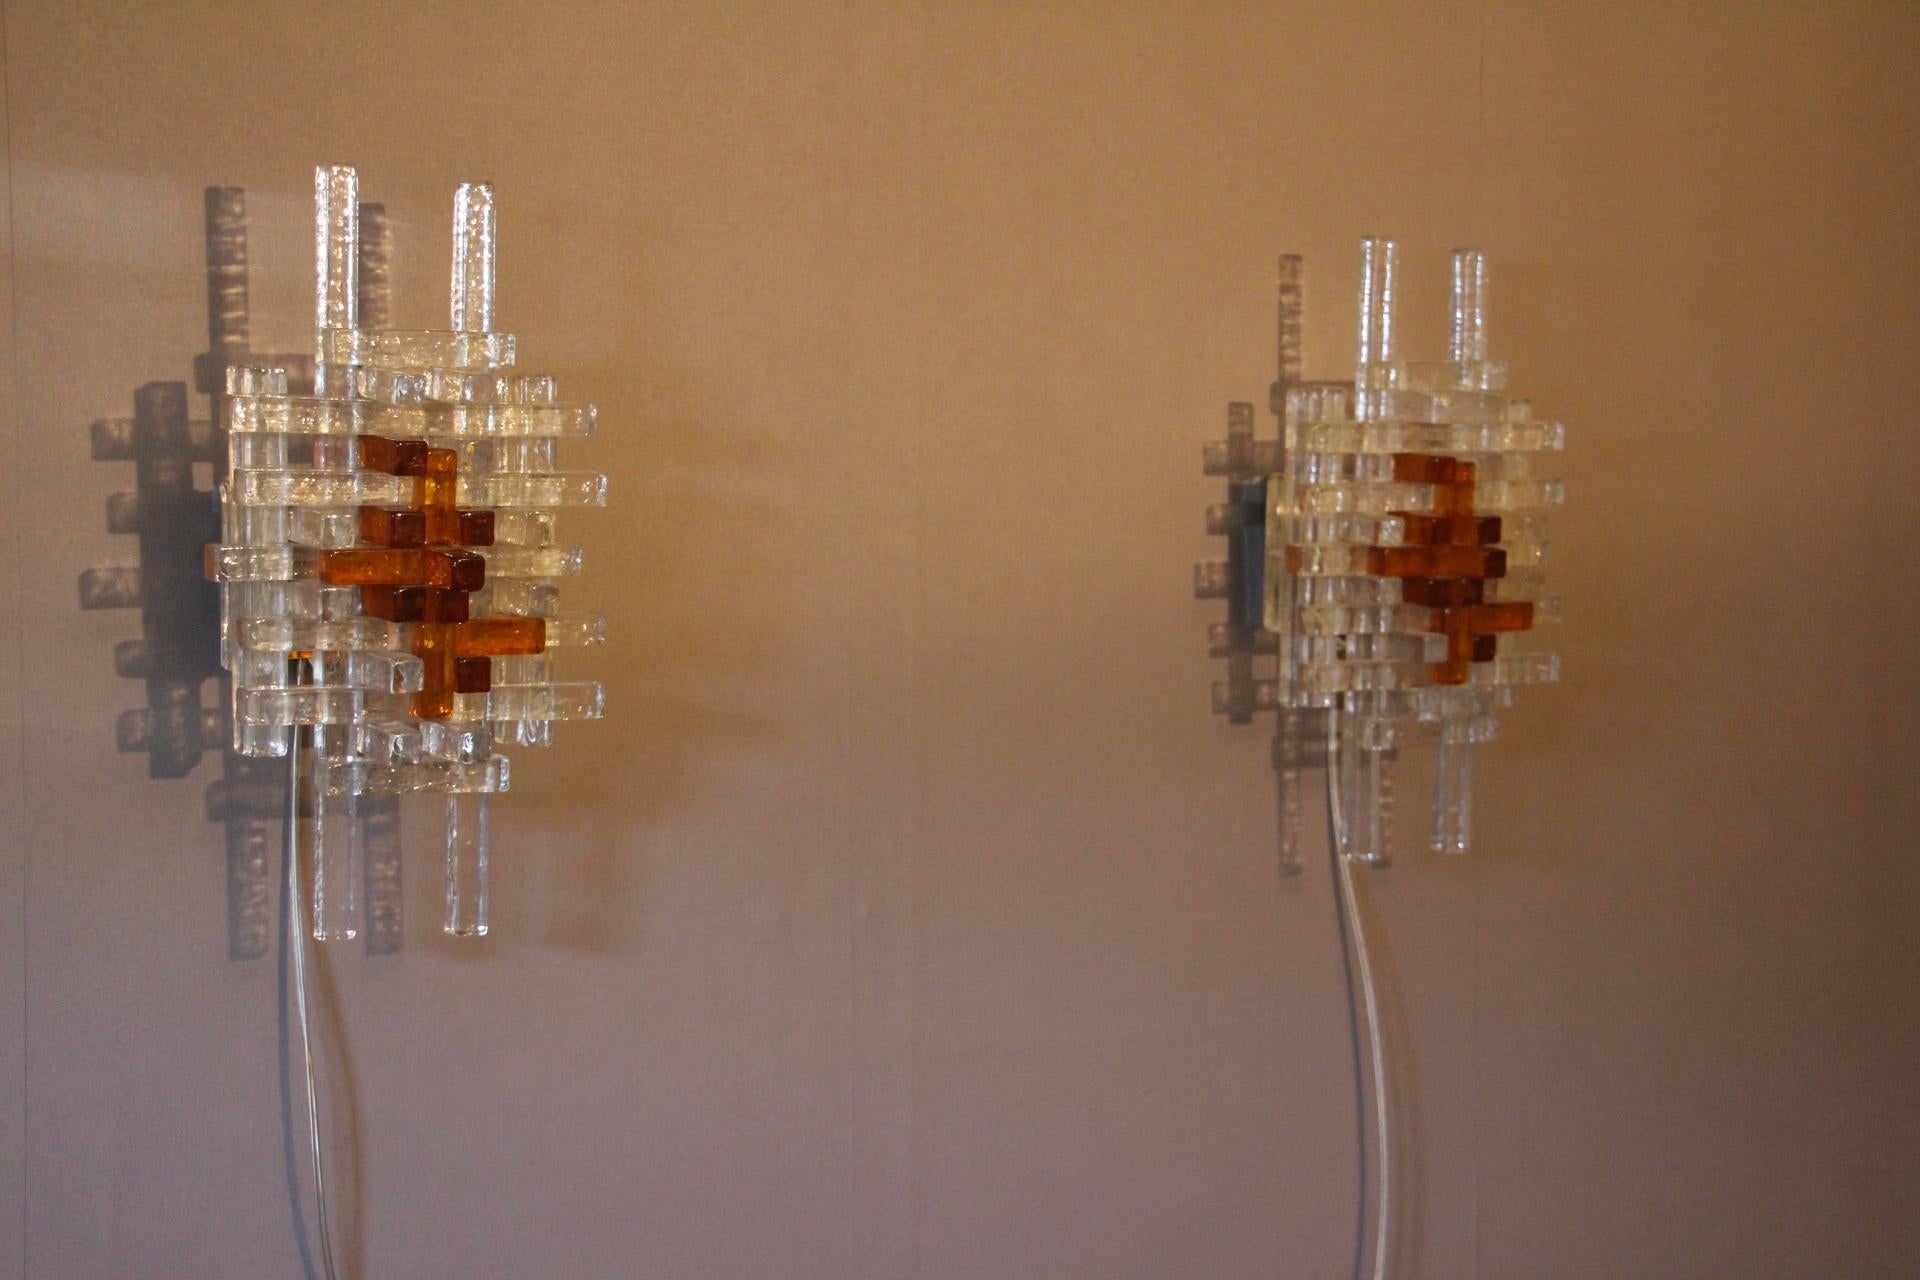 Pair of Mid-Century Modern Wall Lights by Albano Poli for Poliarte 1